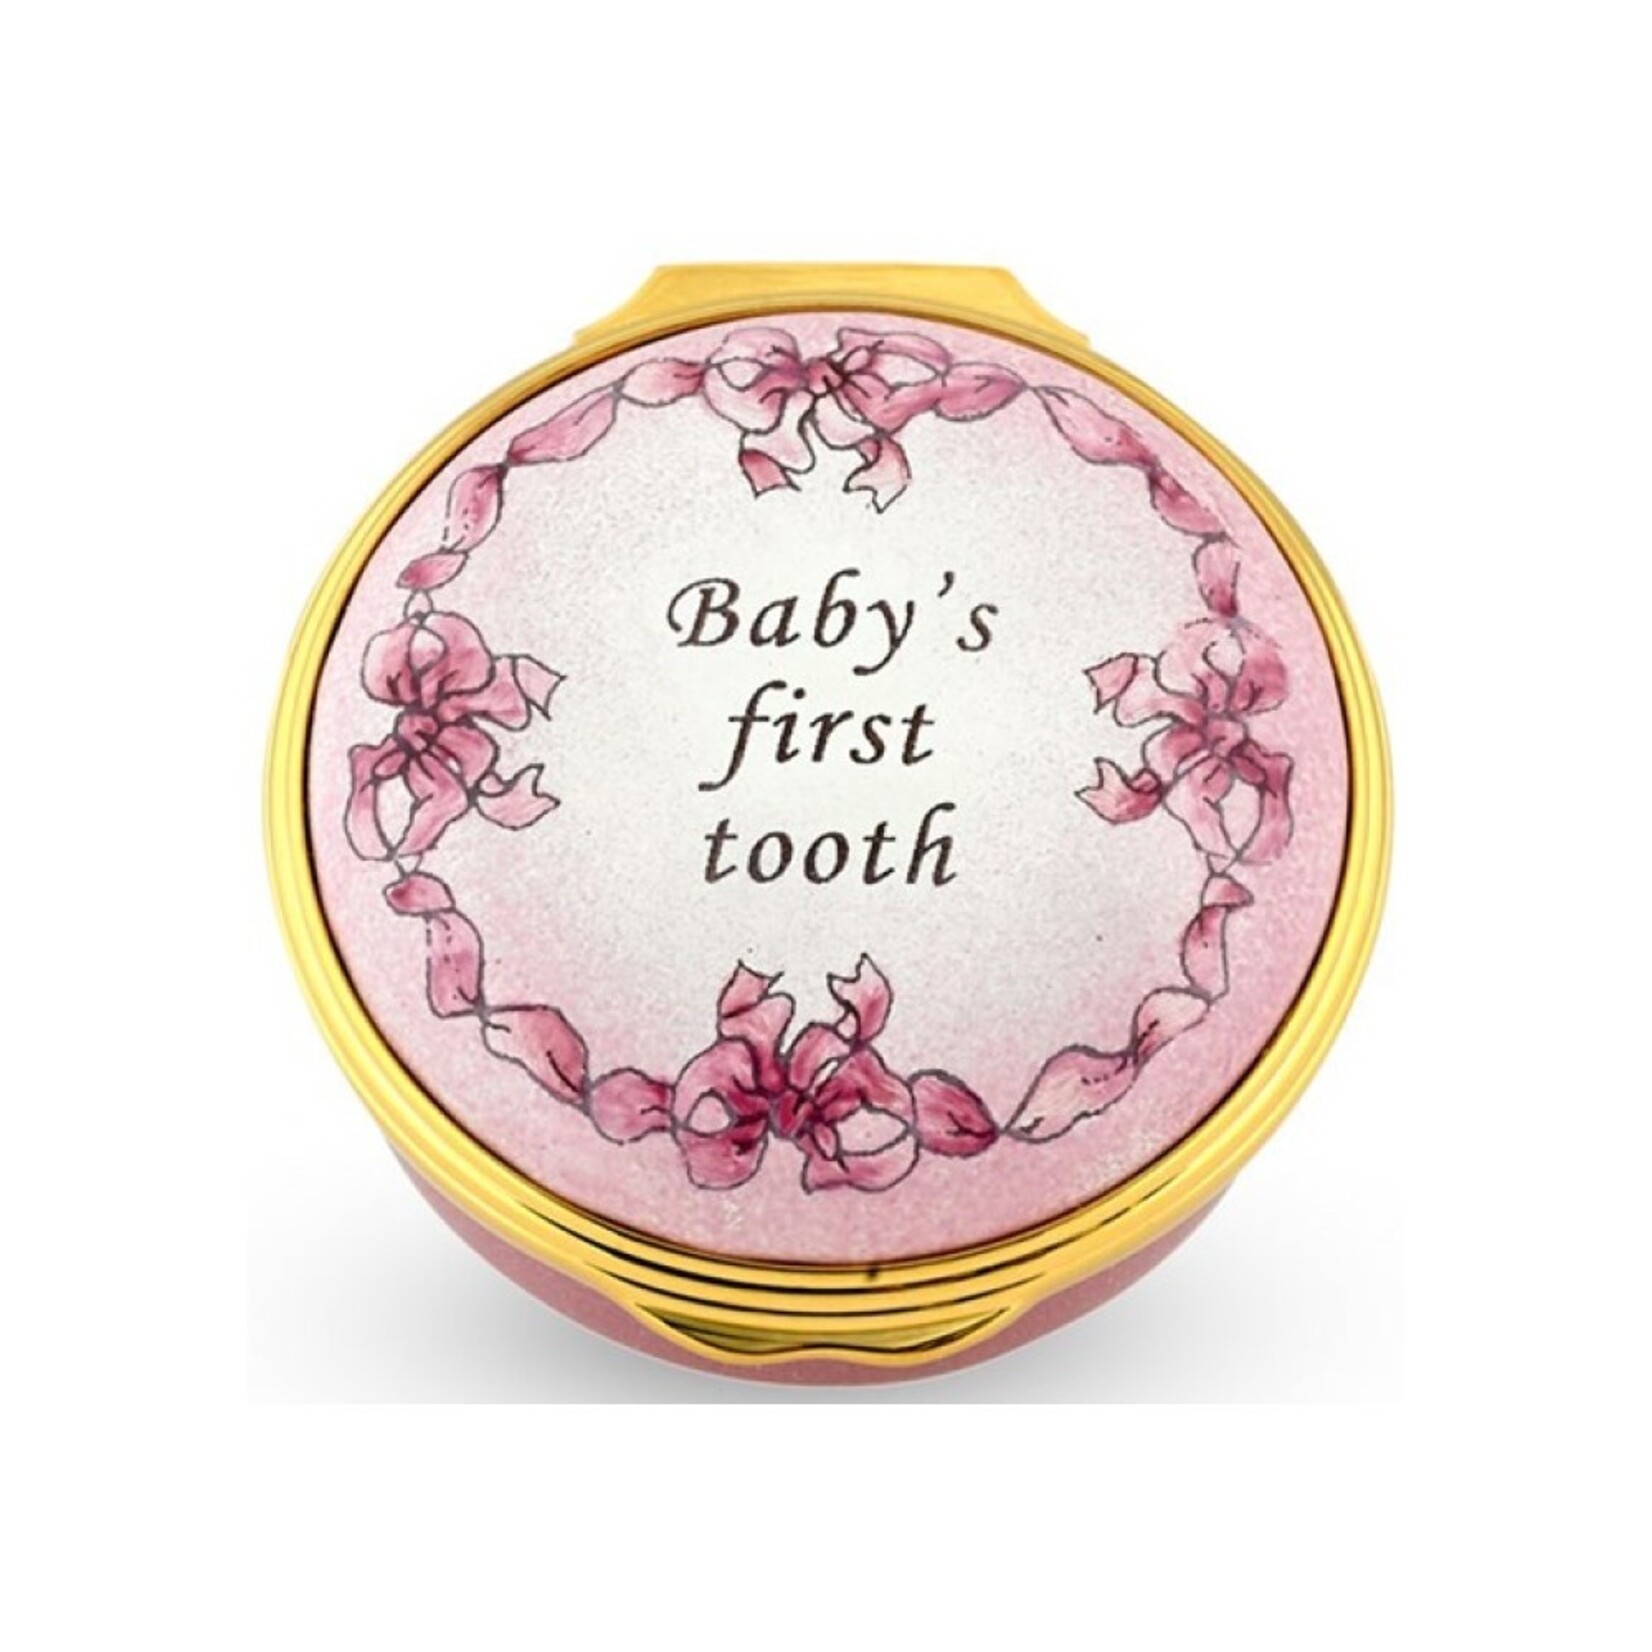 Halcyon Days Baby's First Tooth Box - Pink